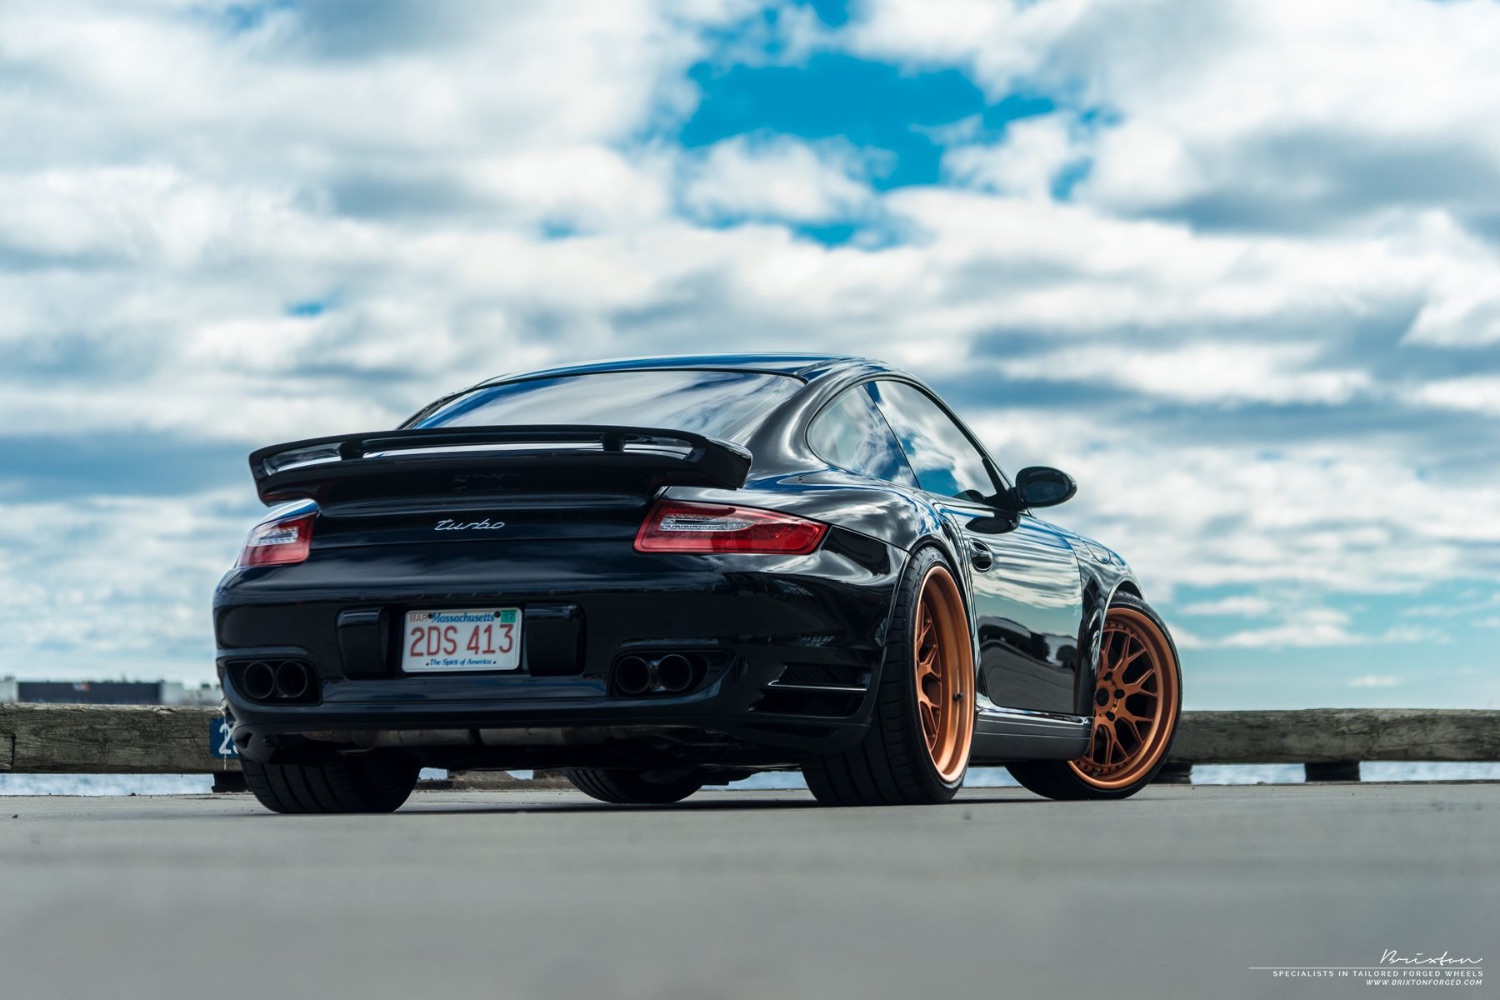 black-porsche-997-turbo-brixton-forged-cm16-circuit-series-forged-wheels-20-inch-rose-gold-concave-3-piece-2-1800x1200